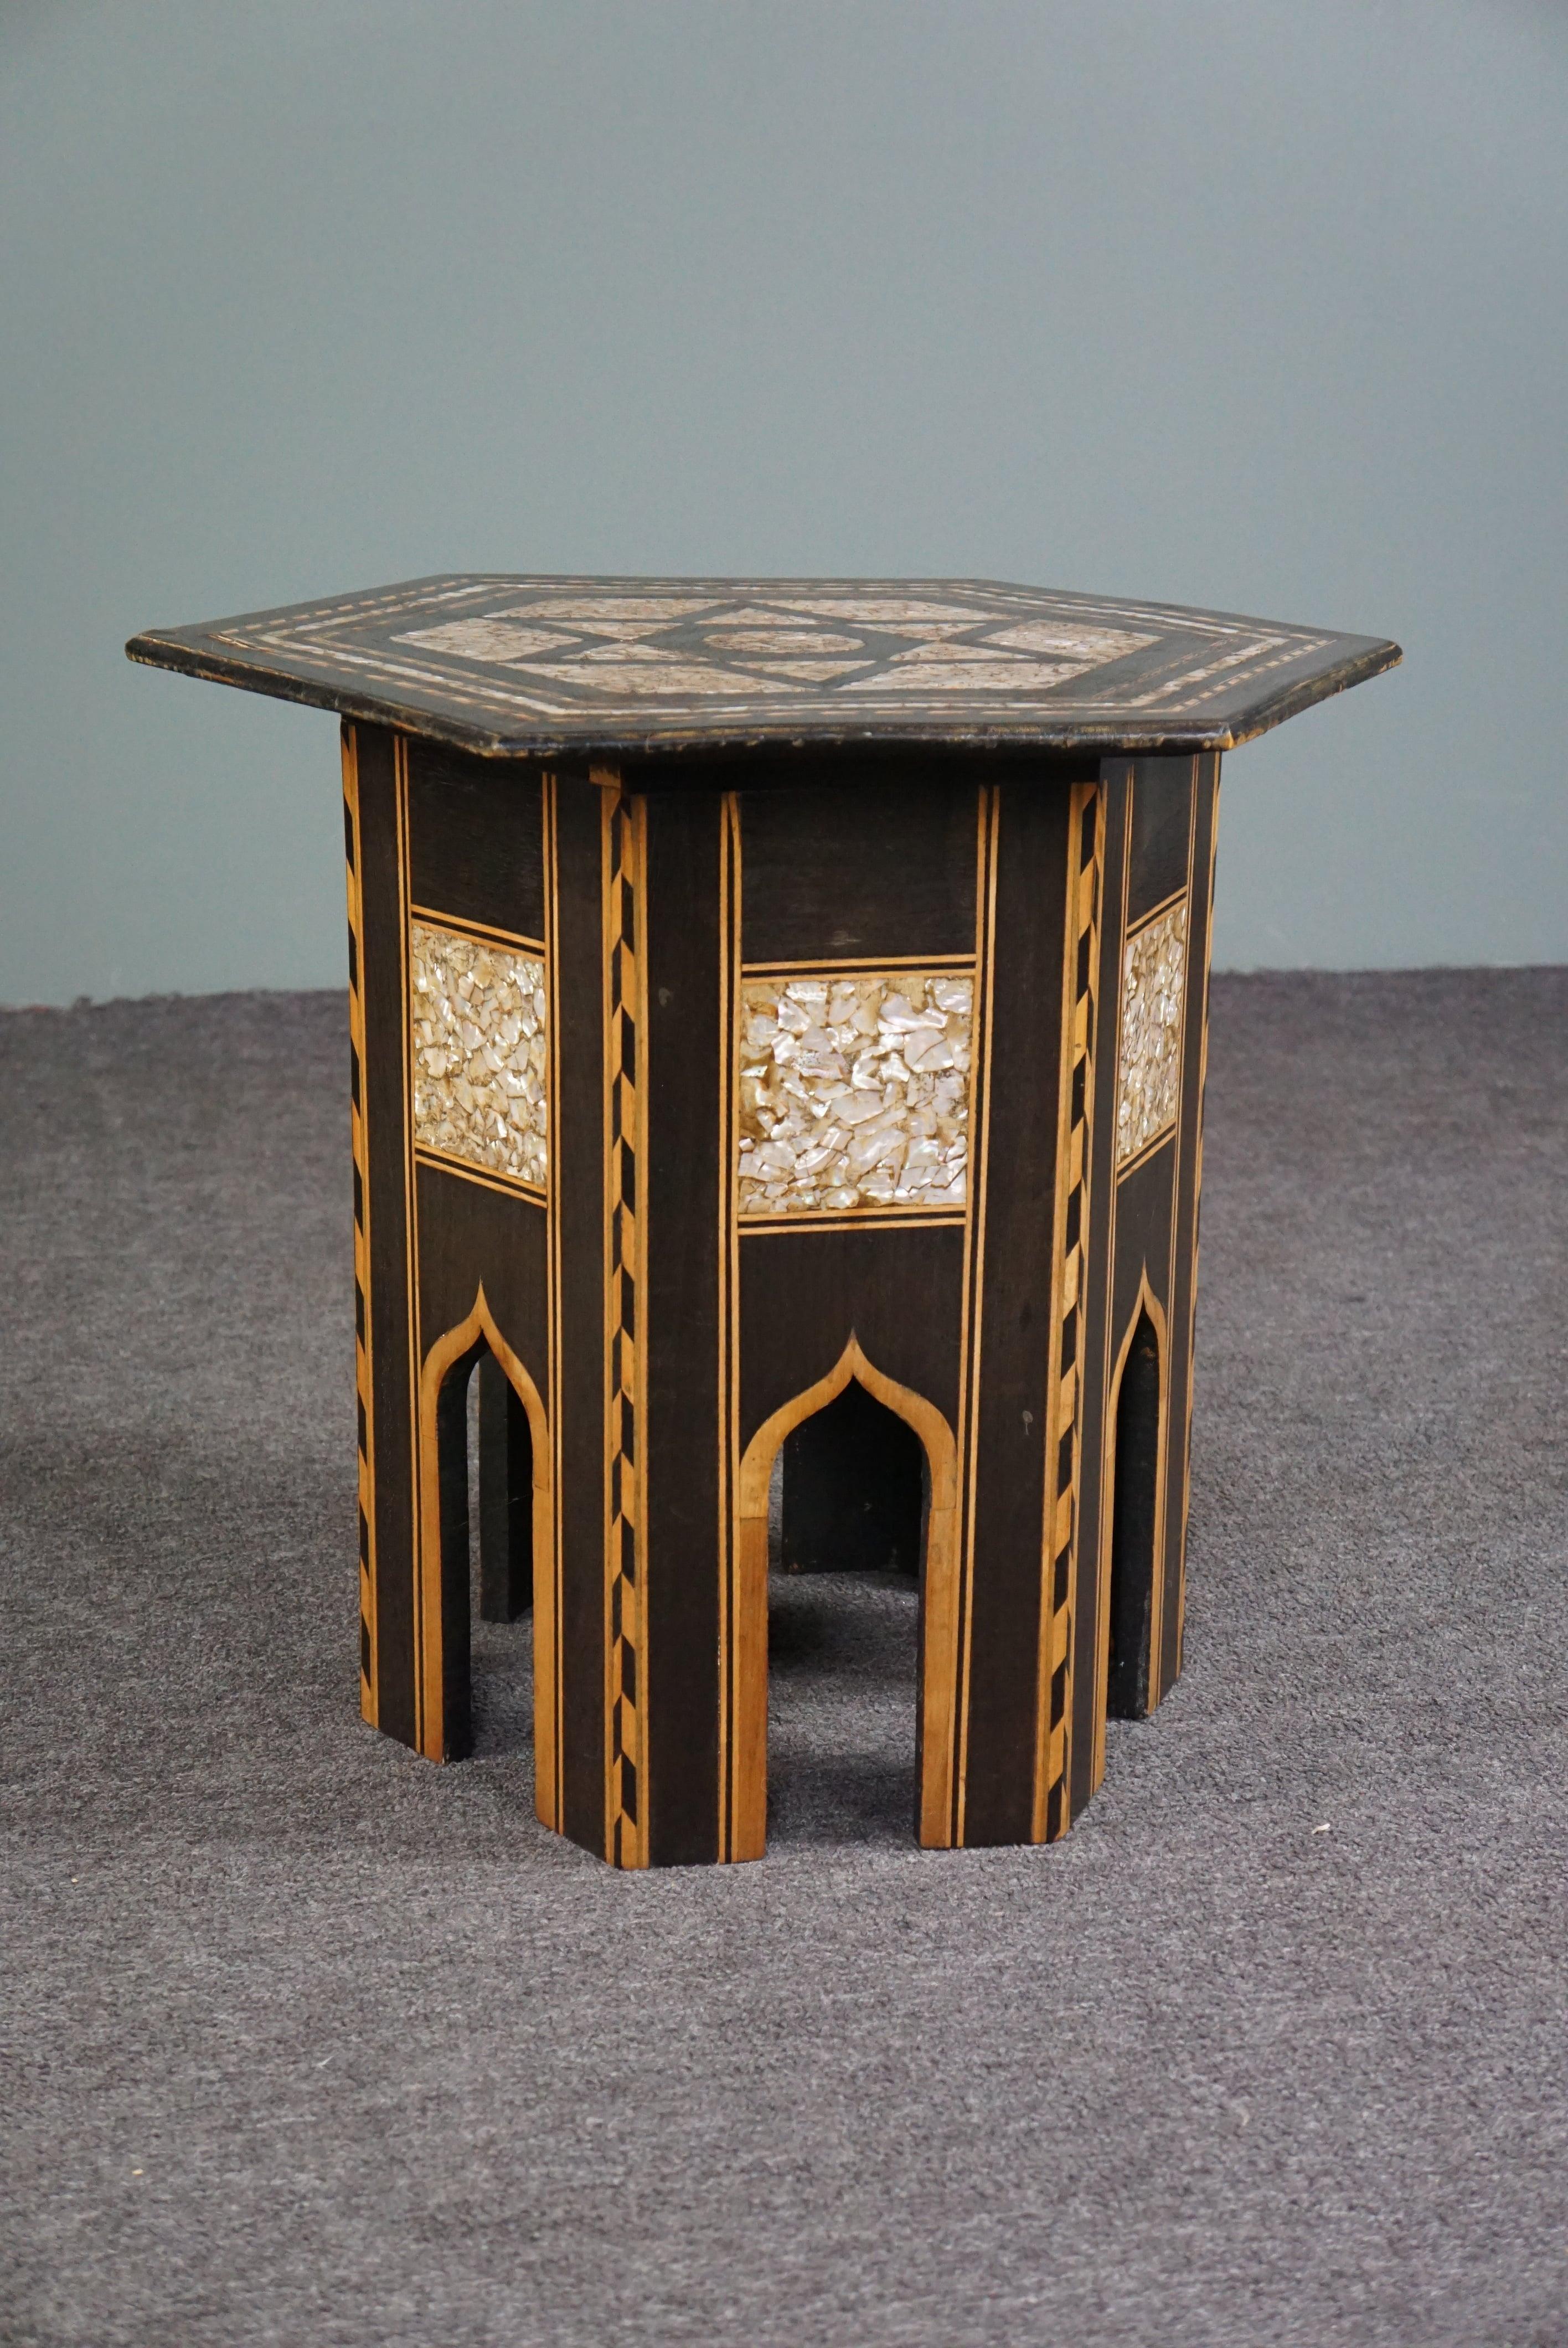 Offered is this beautiful richly decorated side table.

We are pleased to offer this beautiful, very richly inlaid side table for sale. This amazing piece of furniture is beautifully embellished with an intricate pattern and each piece of inlay is